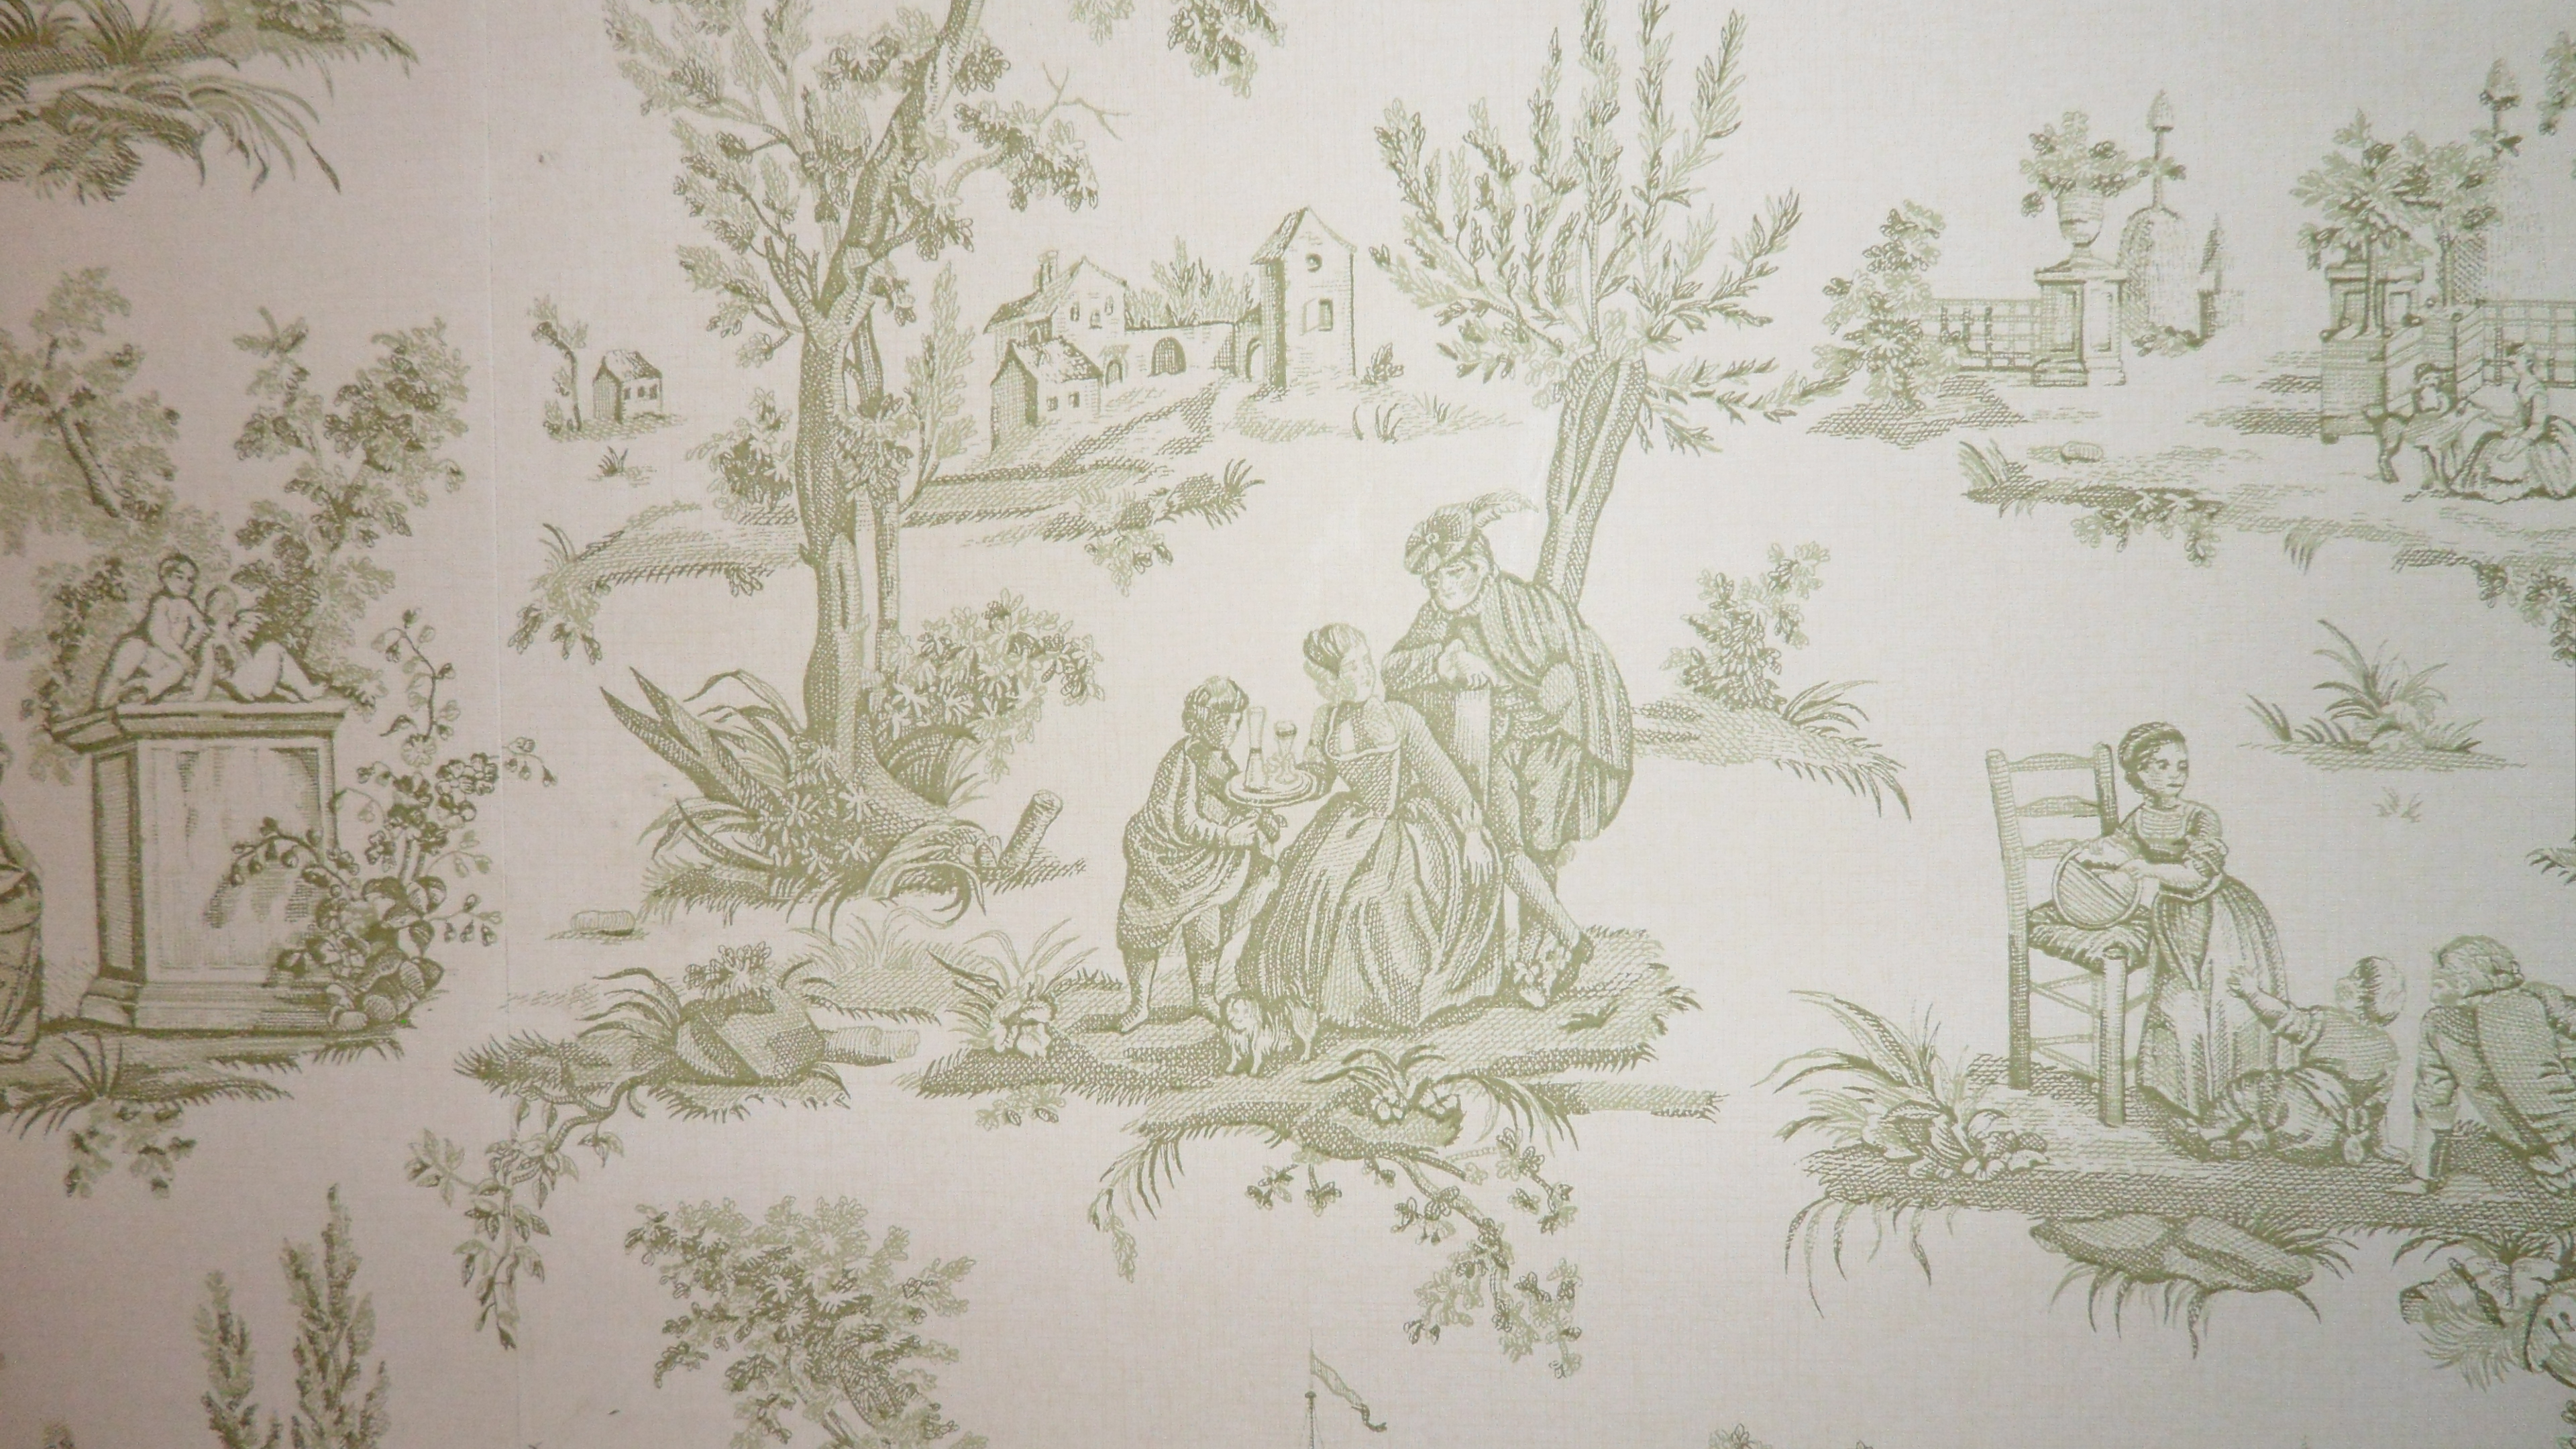 This type of wallpaper is used mostly in English Country and French